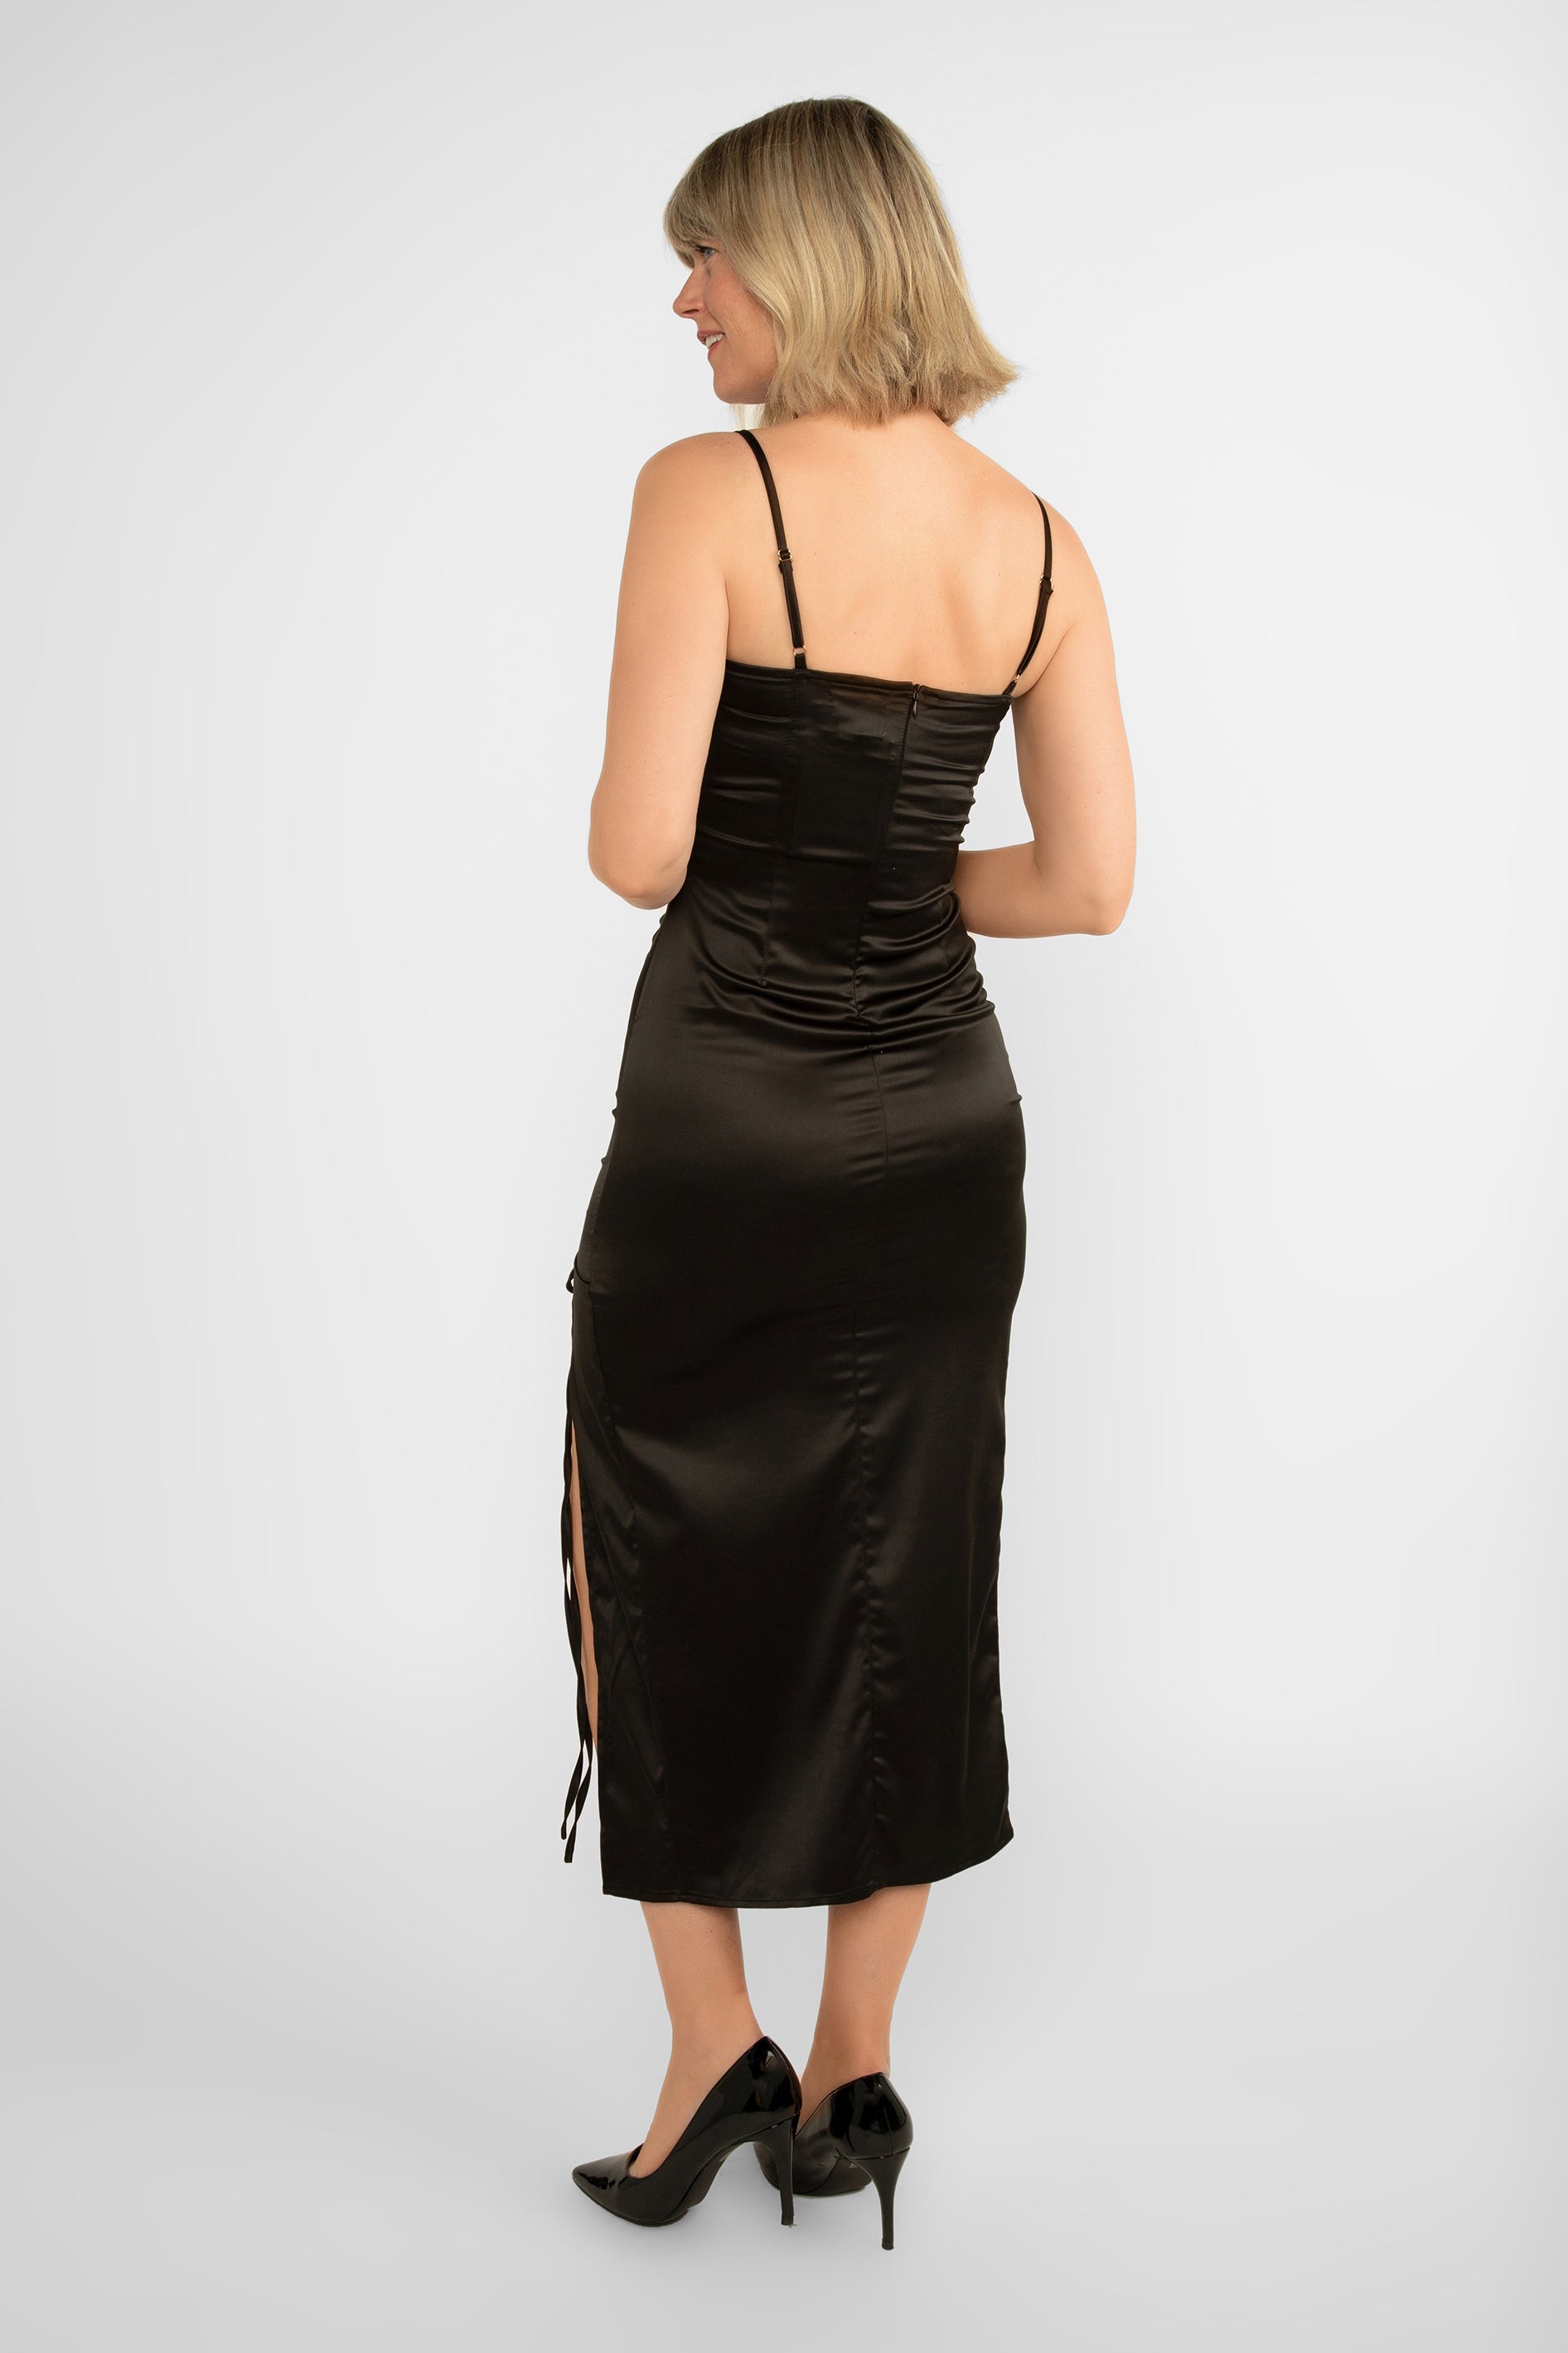 Back view of LATE (DR-2918400) Monica Dress - Satin Midi Body Con Dress with High Side split and curve accentuating ruching in Black